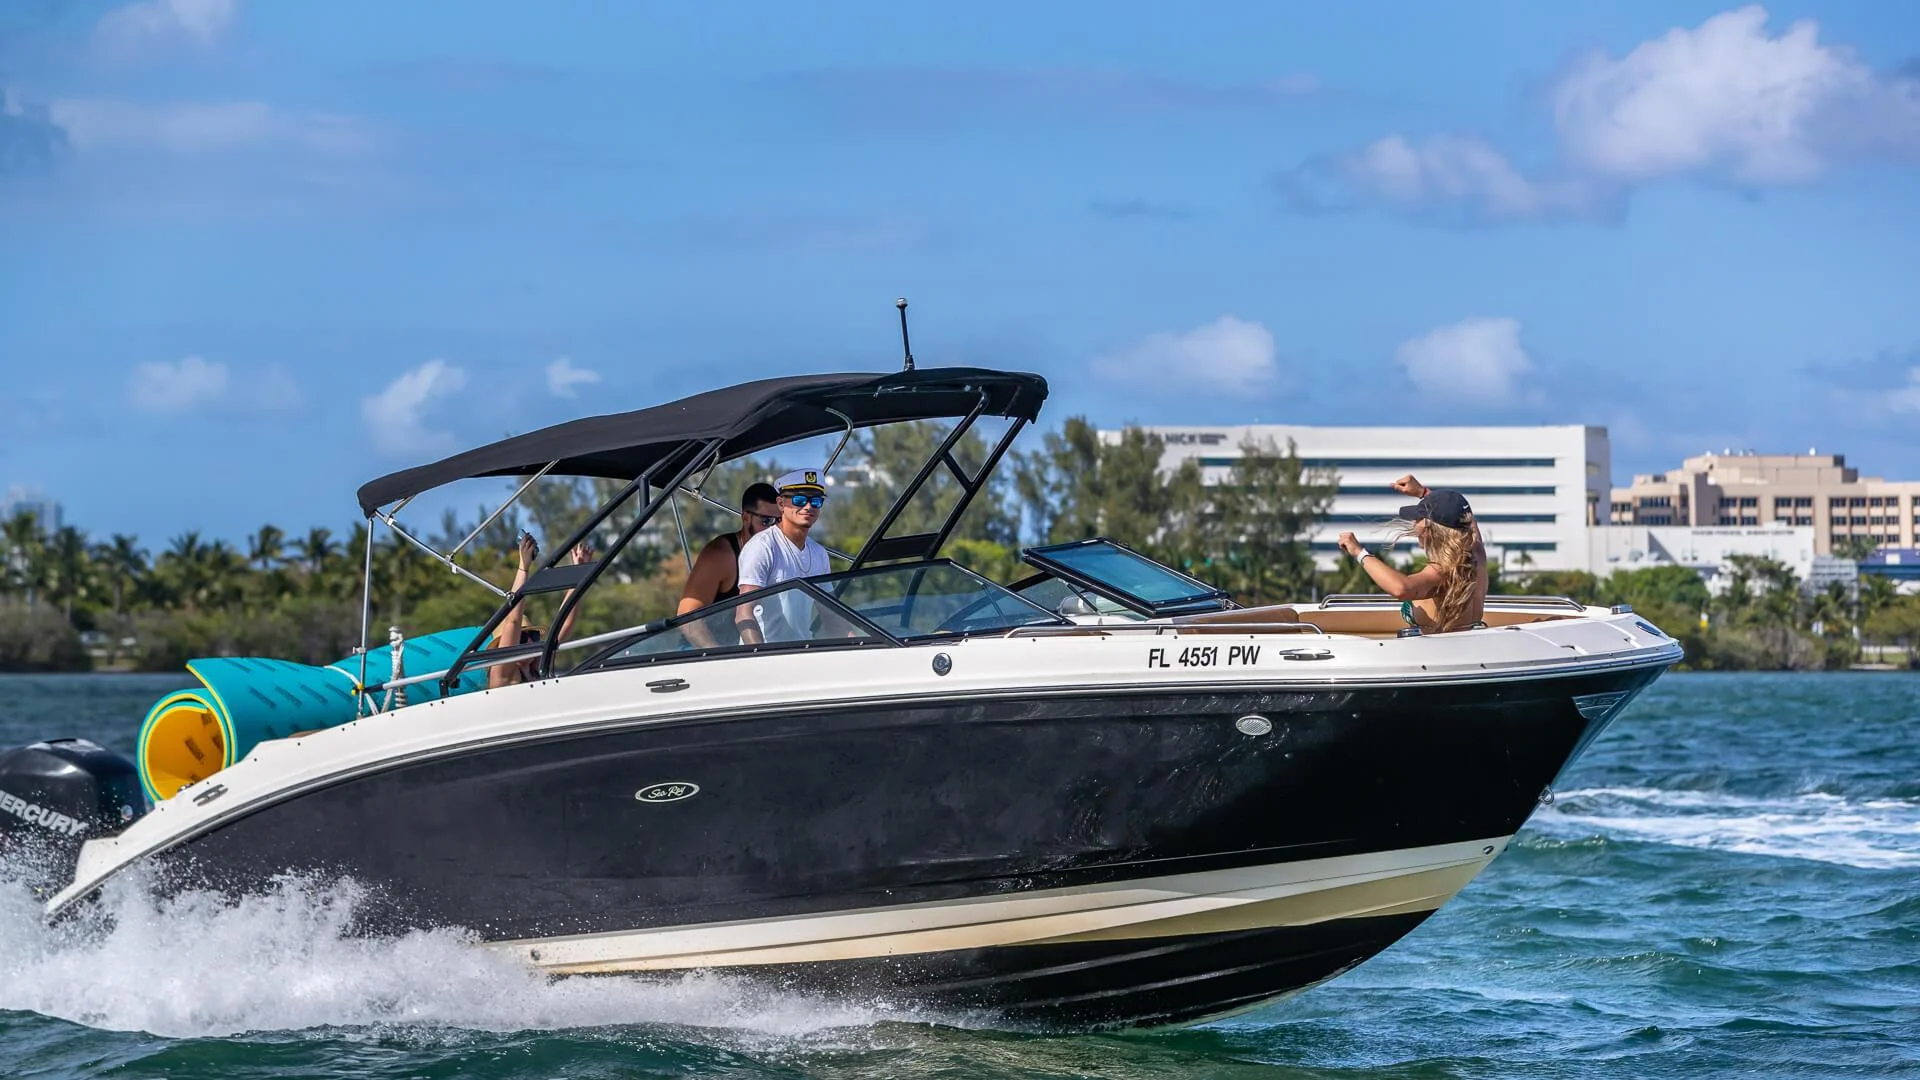 Best Boat Rentals And Boat Parties Miami